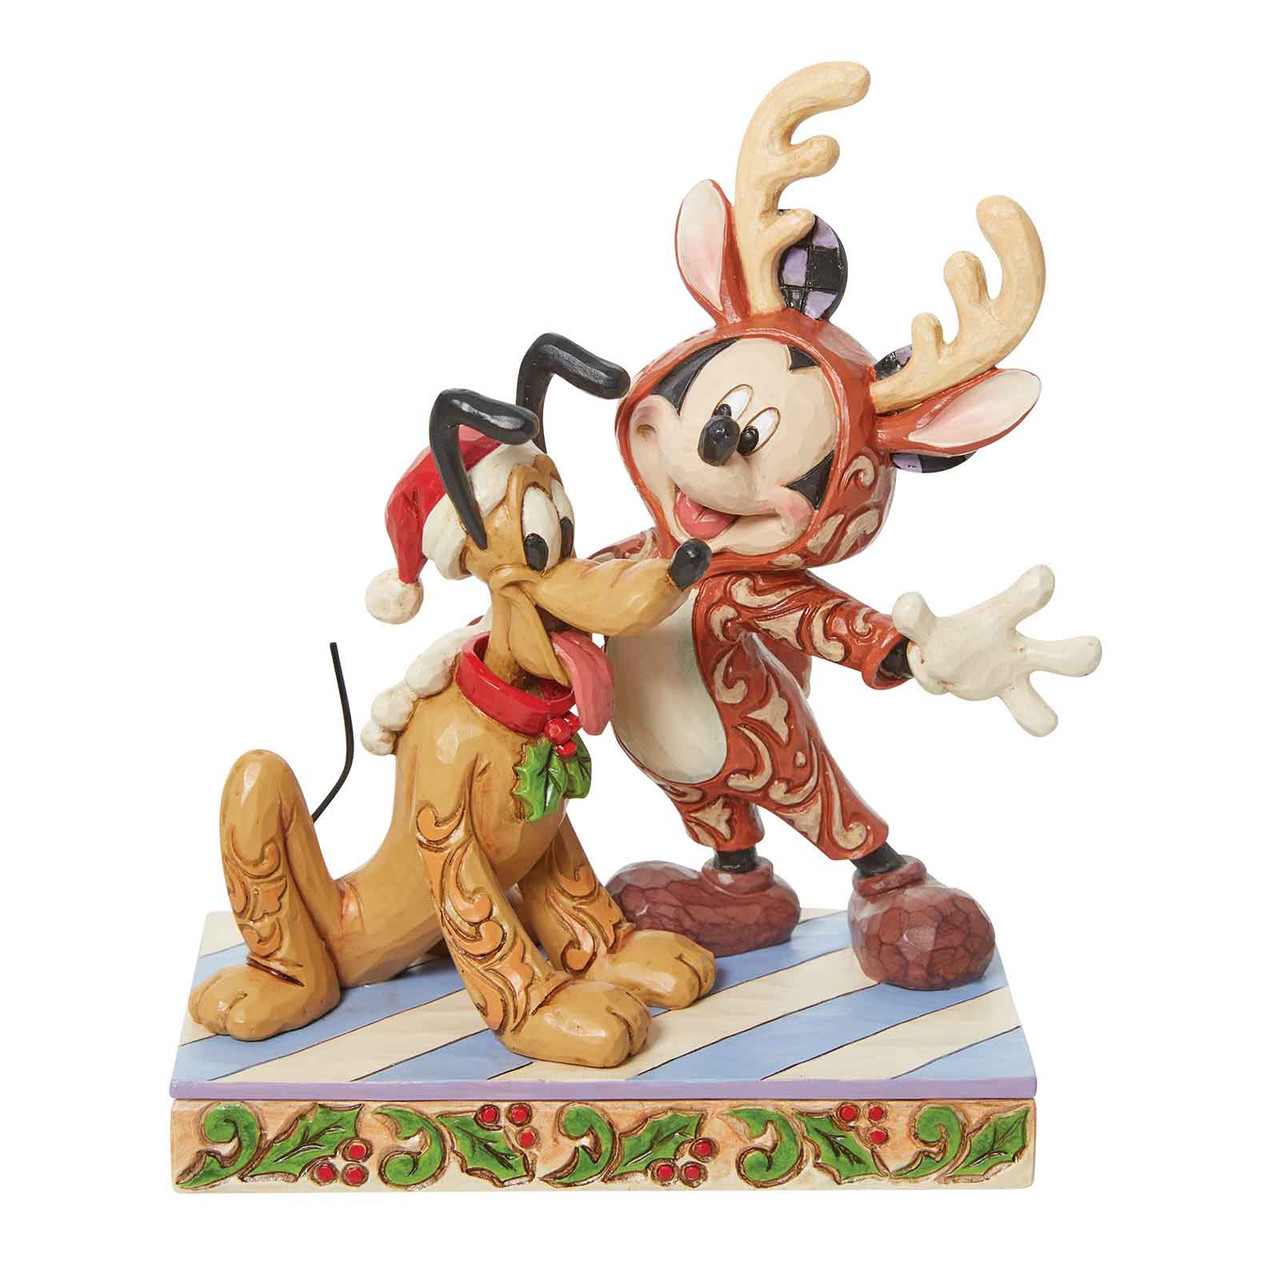 Disney Traditions Mickey Mouse Reindeer with Santa Pluto Christmas Figurine  by Jim Shore